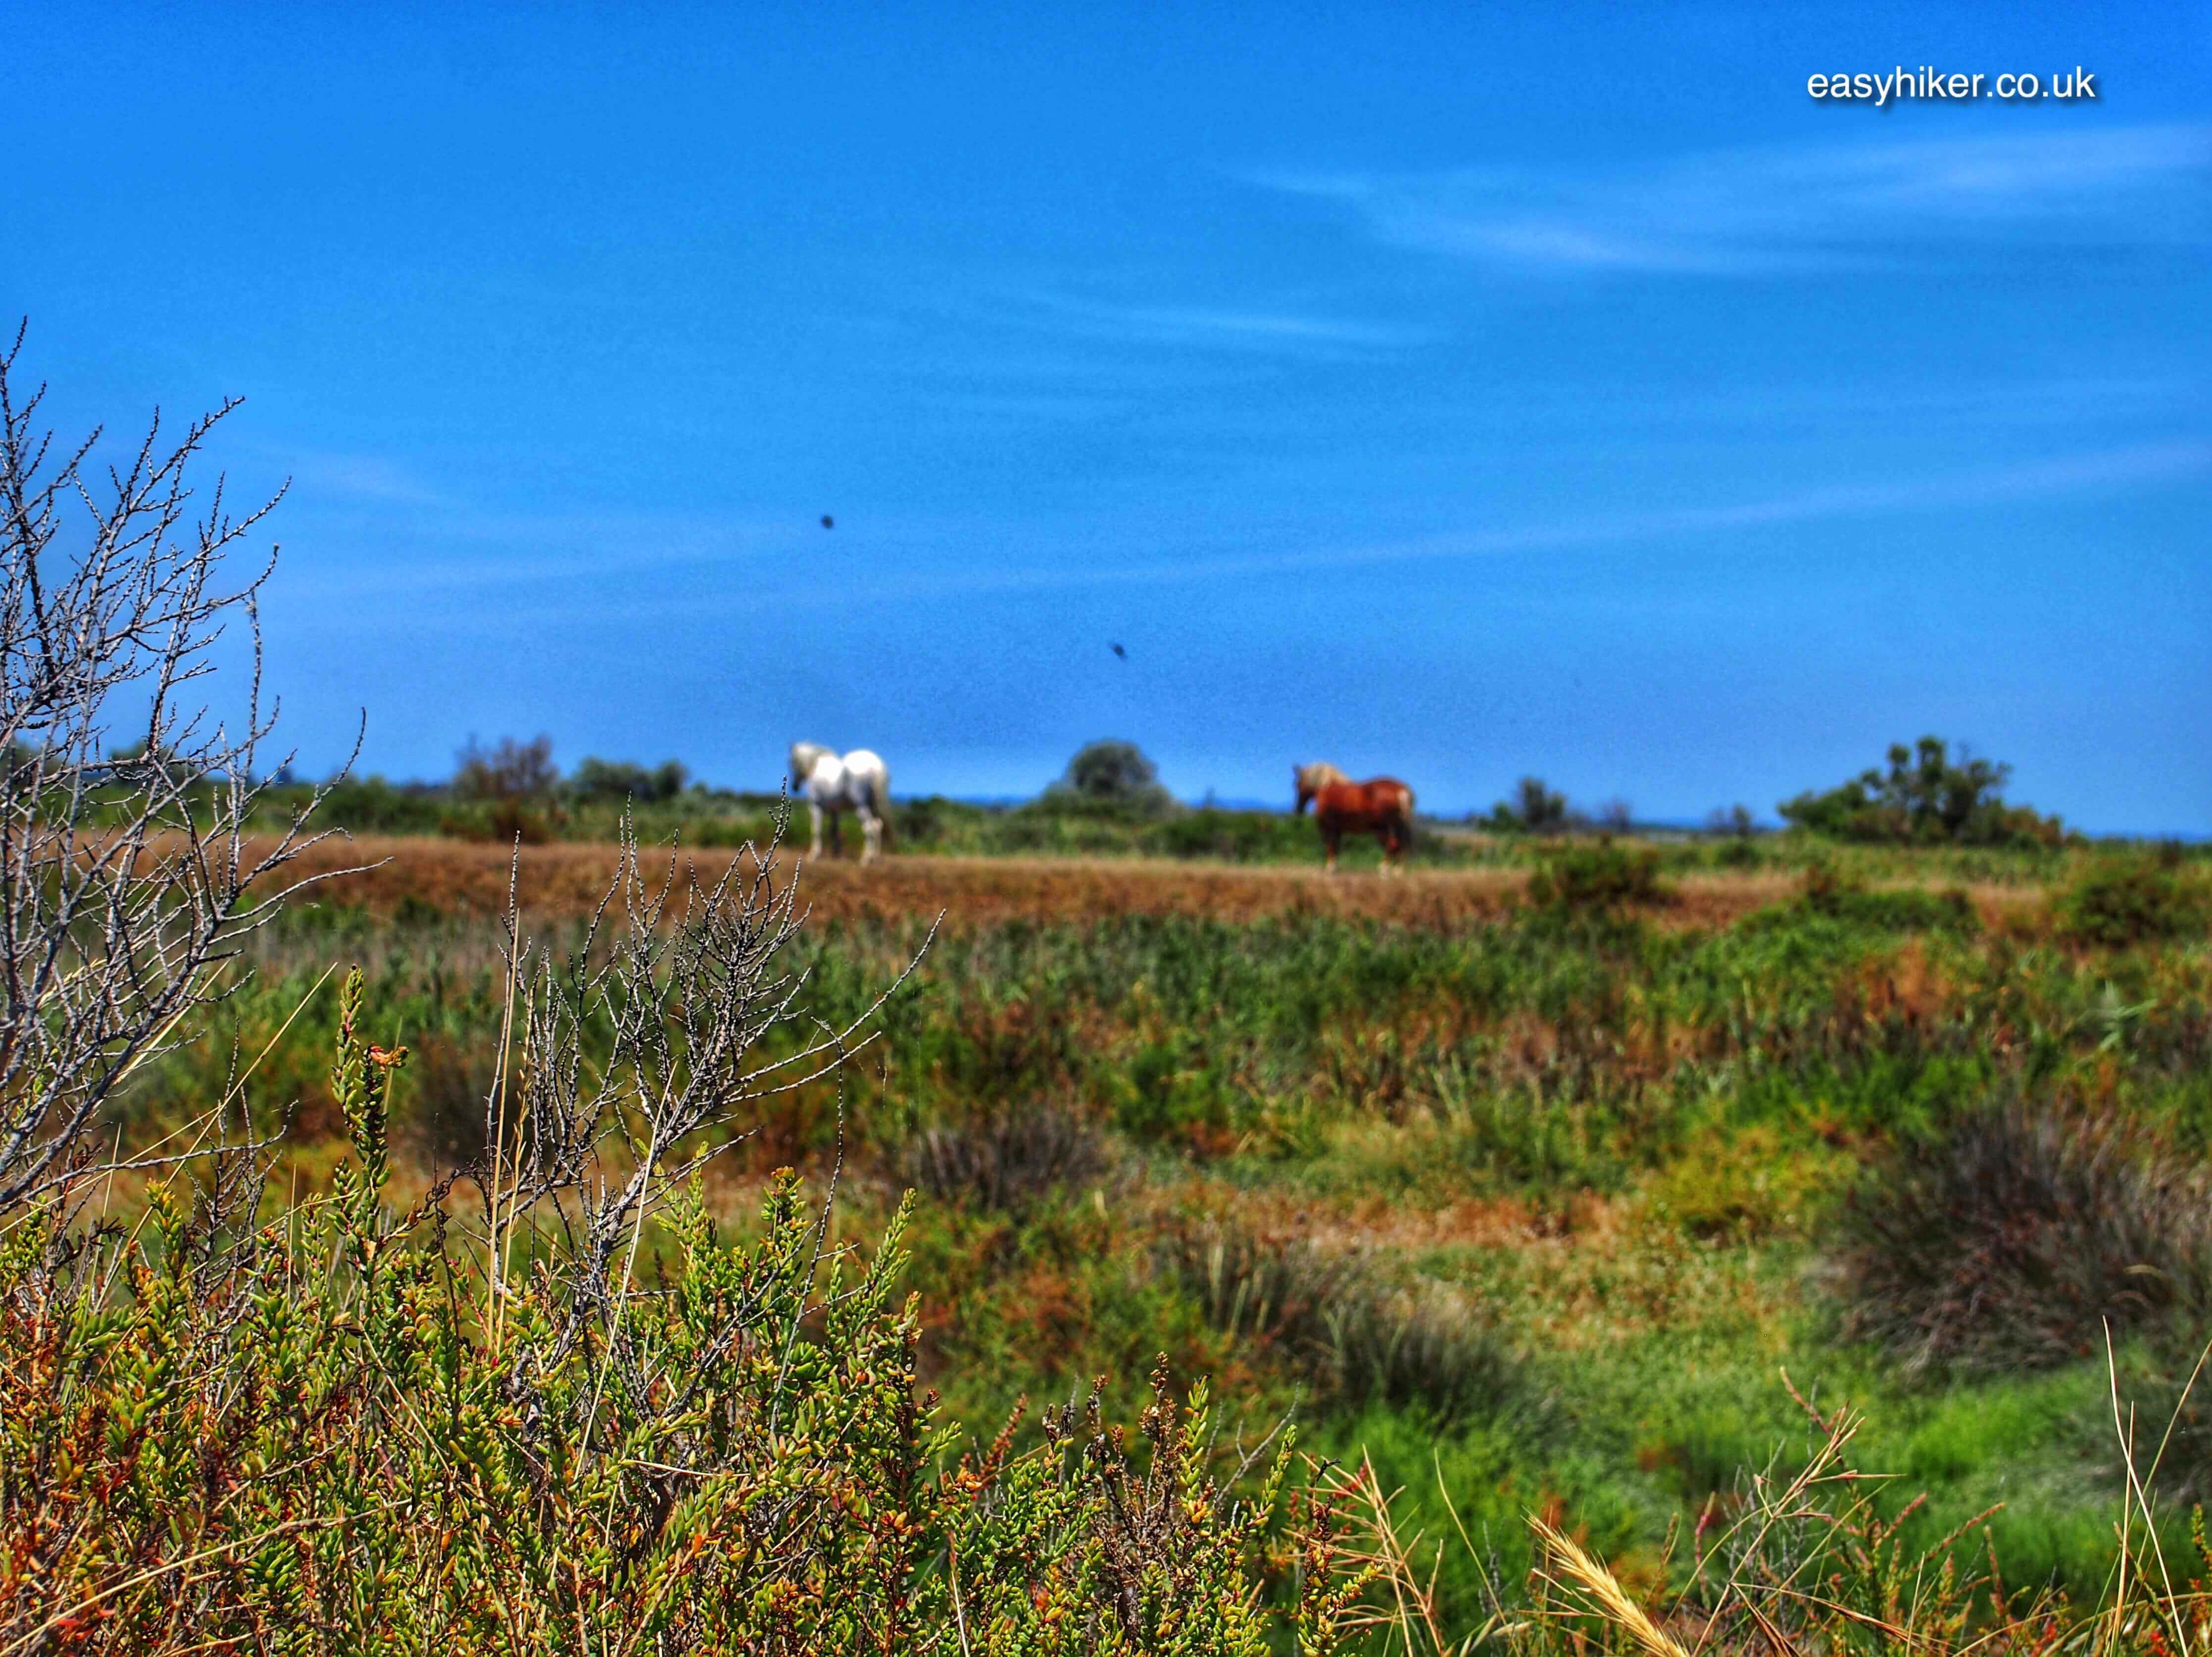 "some wild horses along the wild marshlands of the Camargue"